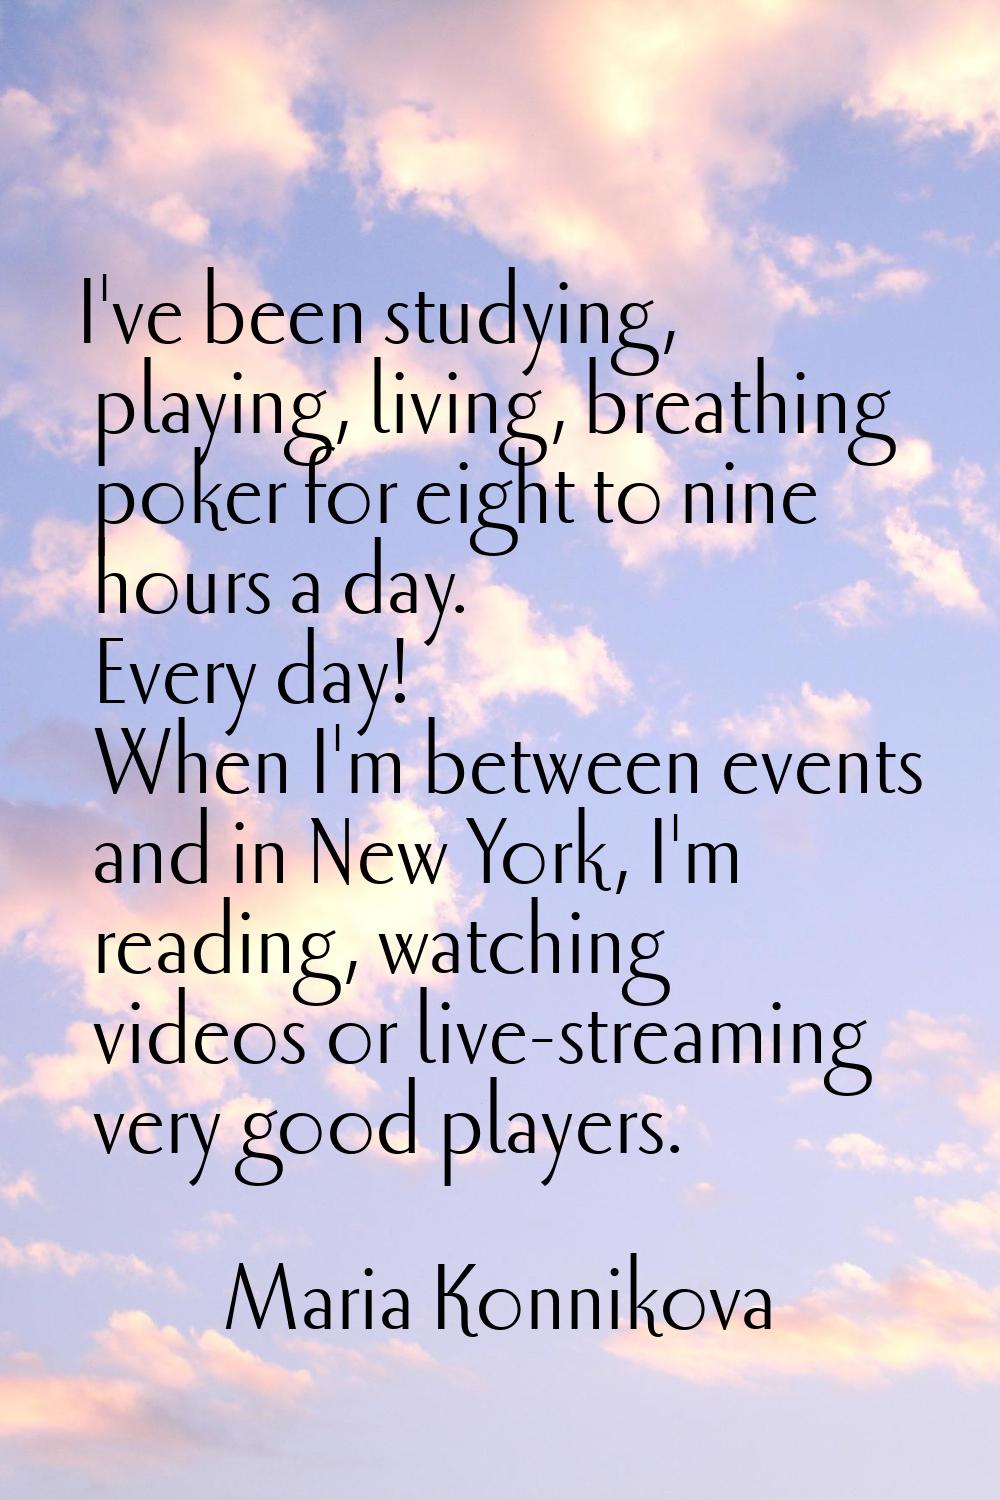 I've been studying, playing, living, breathing poker for eight to nine hours a day. Every day! When